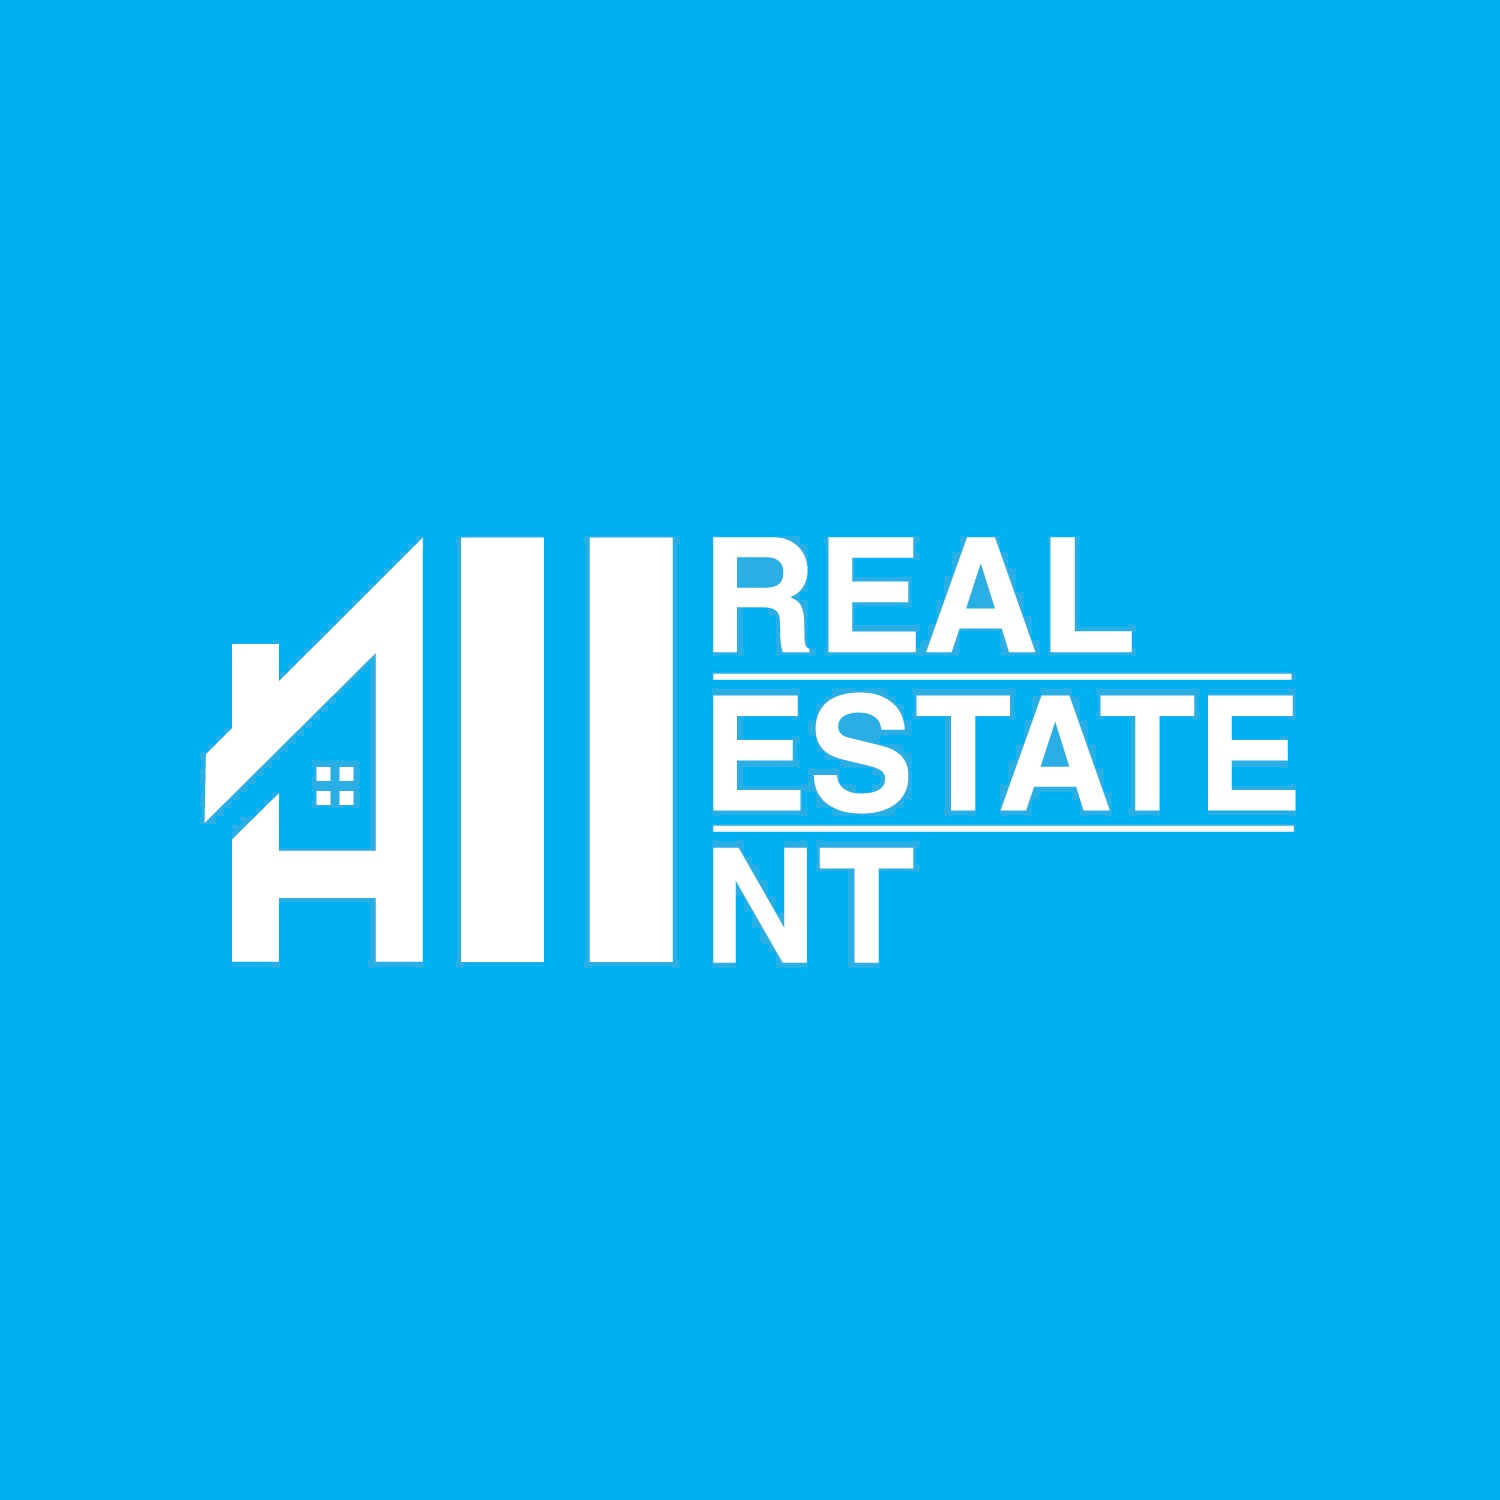 All Real Estate NT